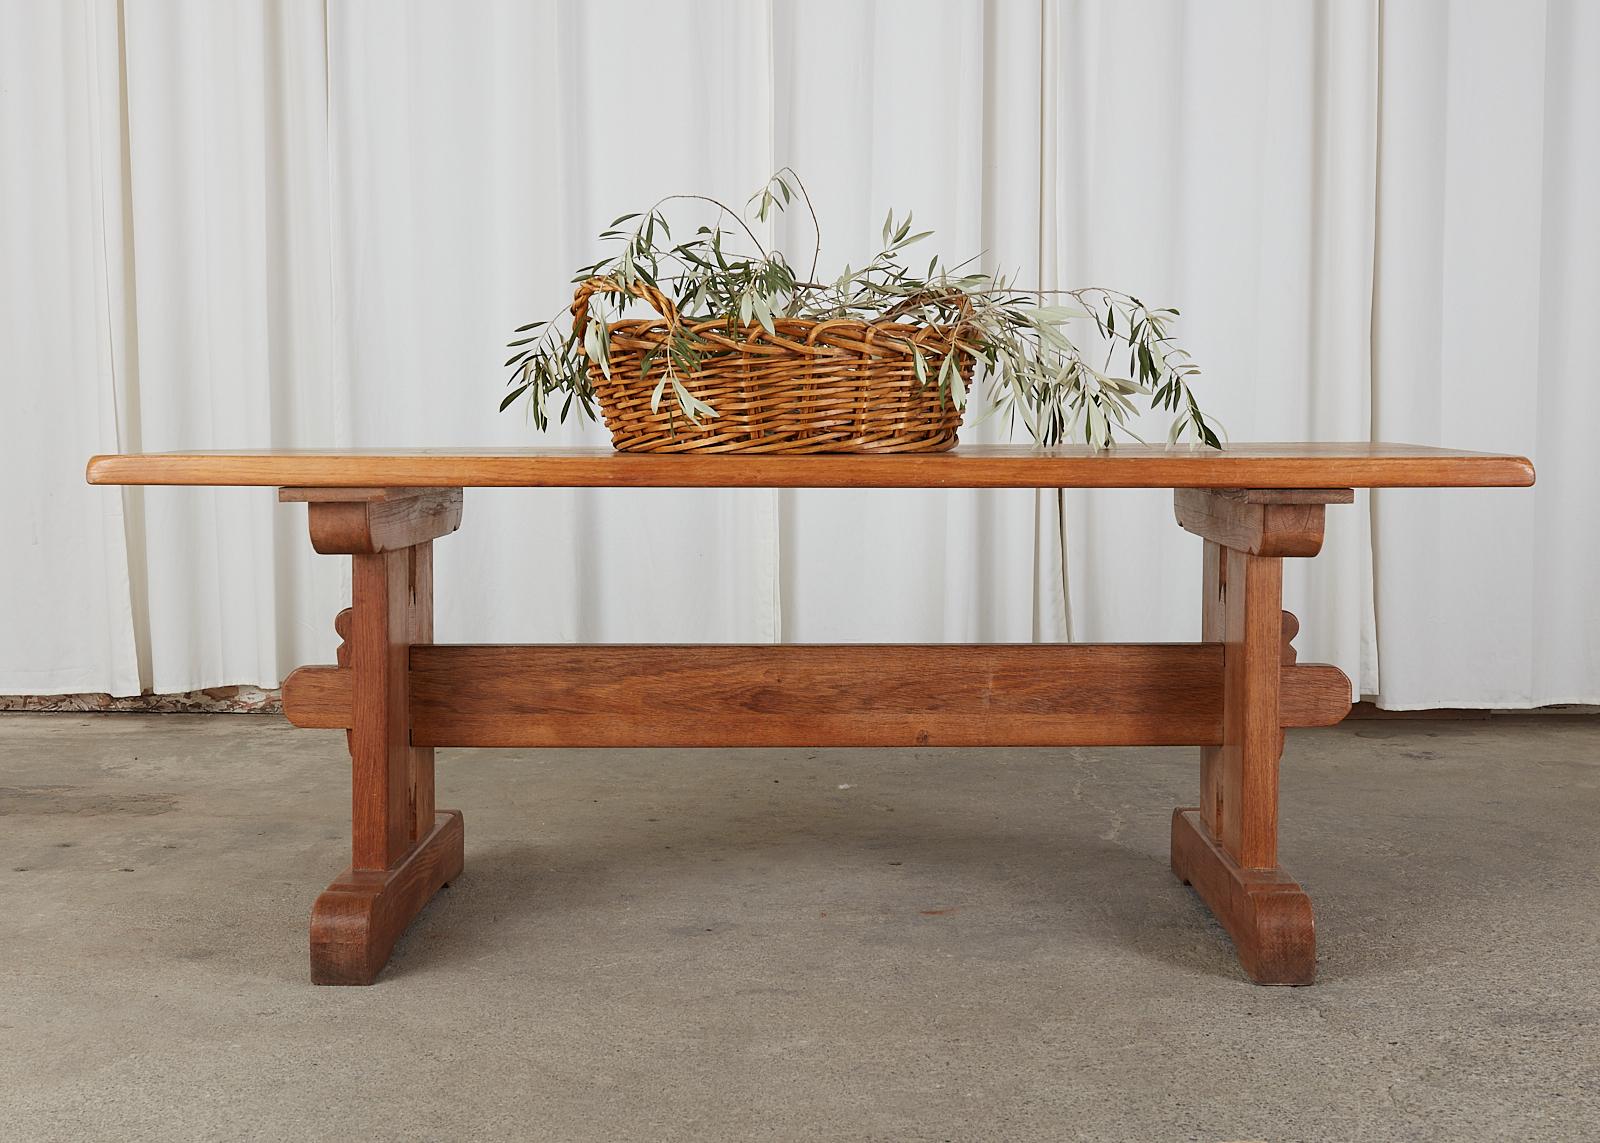 Rustic French oak farmhouse trestle dining table featuring an arts and crafts or craftsman style. The thick 1.5 inch solid top is supported by double pedestal legs conjoined with exposed mortise and tenon joinery. The legs end with simple shoe feet.